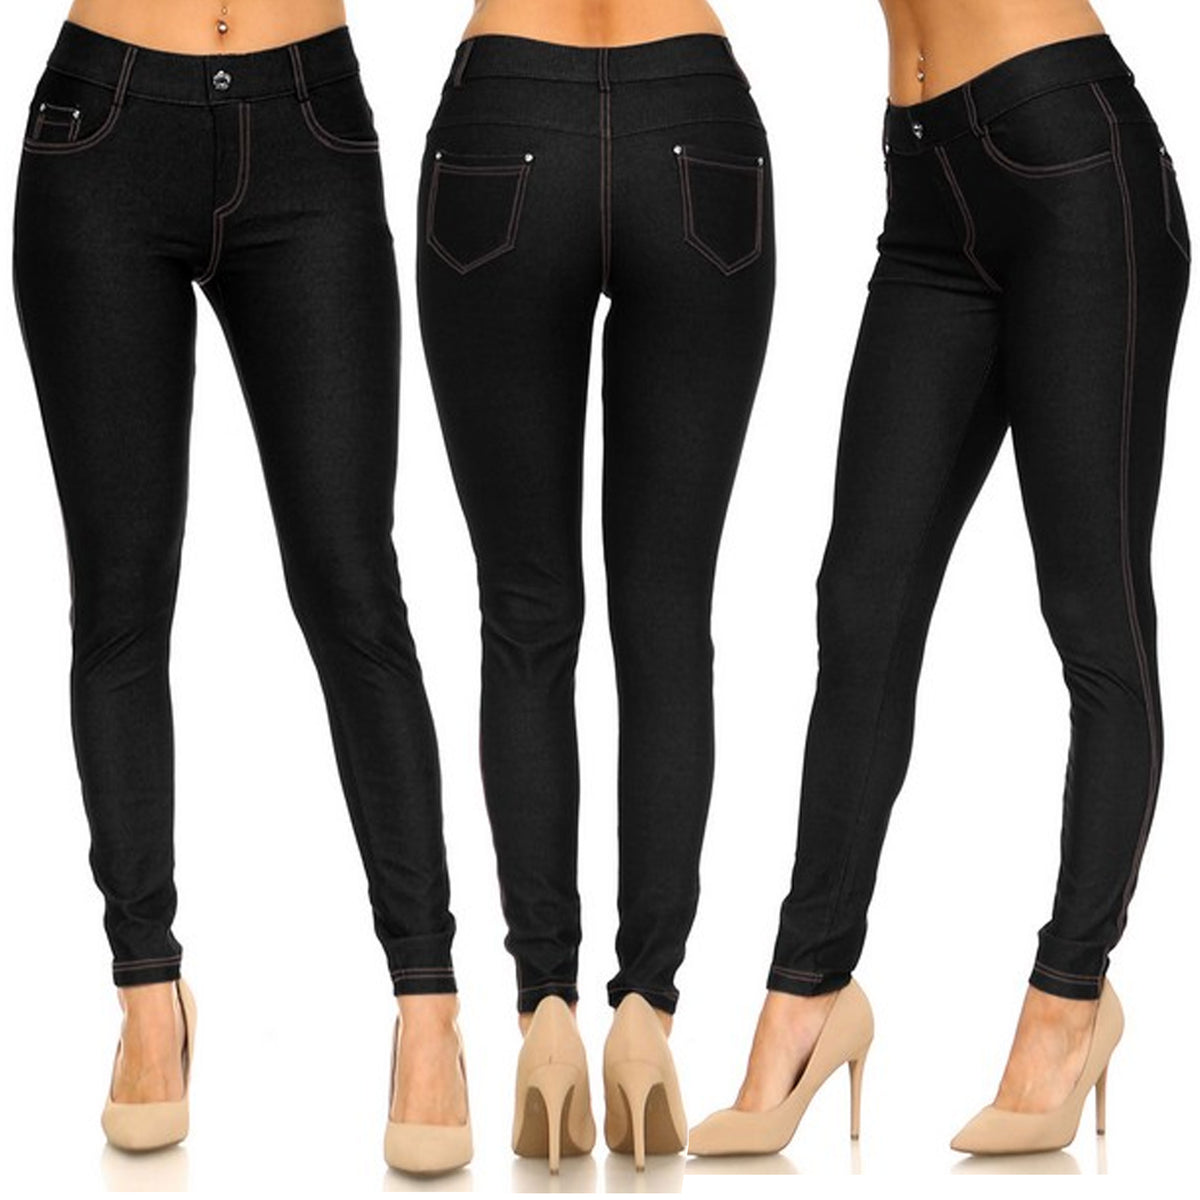 Buy Voglily Jean Leggings for Women Denim High Waisted Yoga Pants Stretch  Jean Look Jeggings Tights (Black,S) at